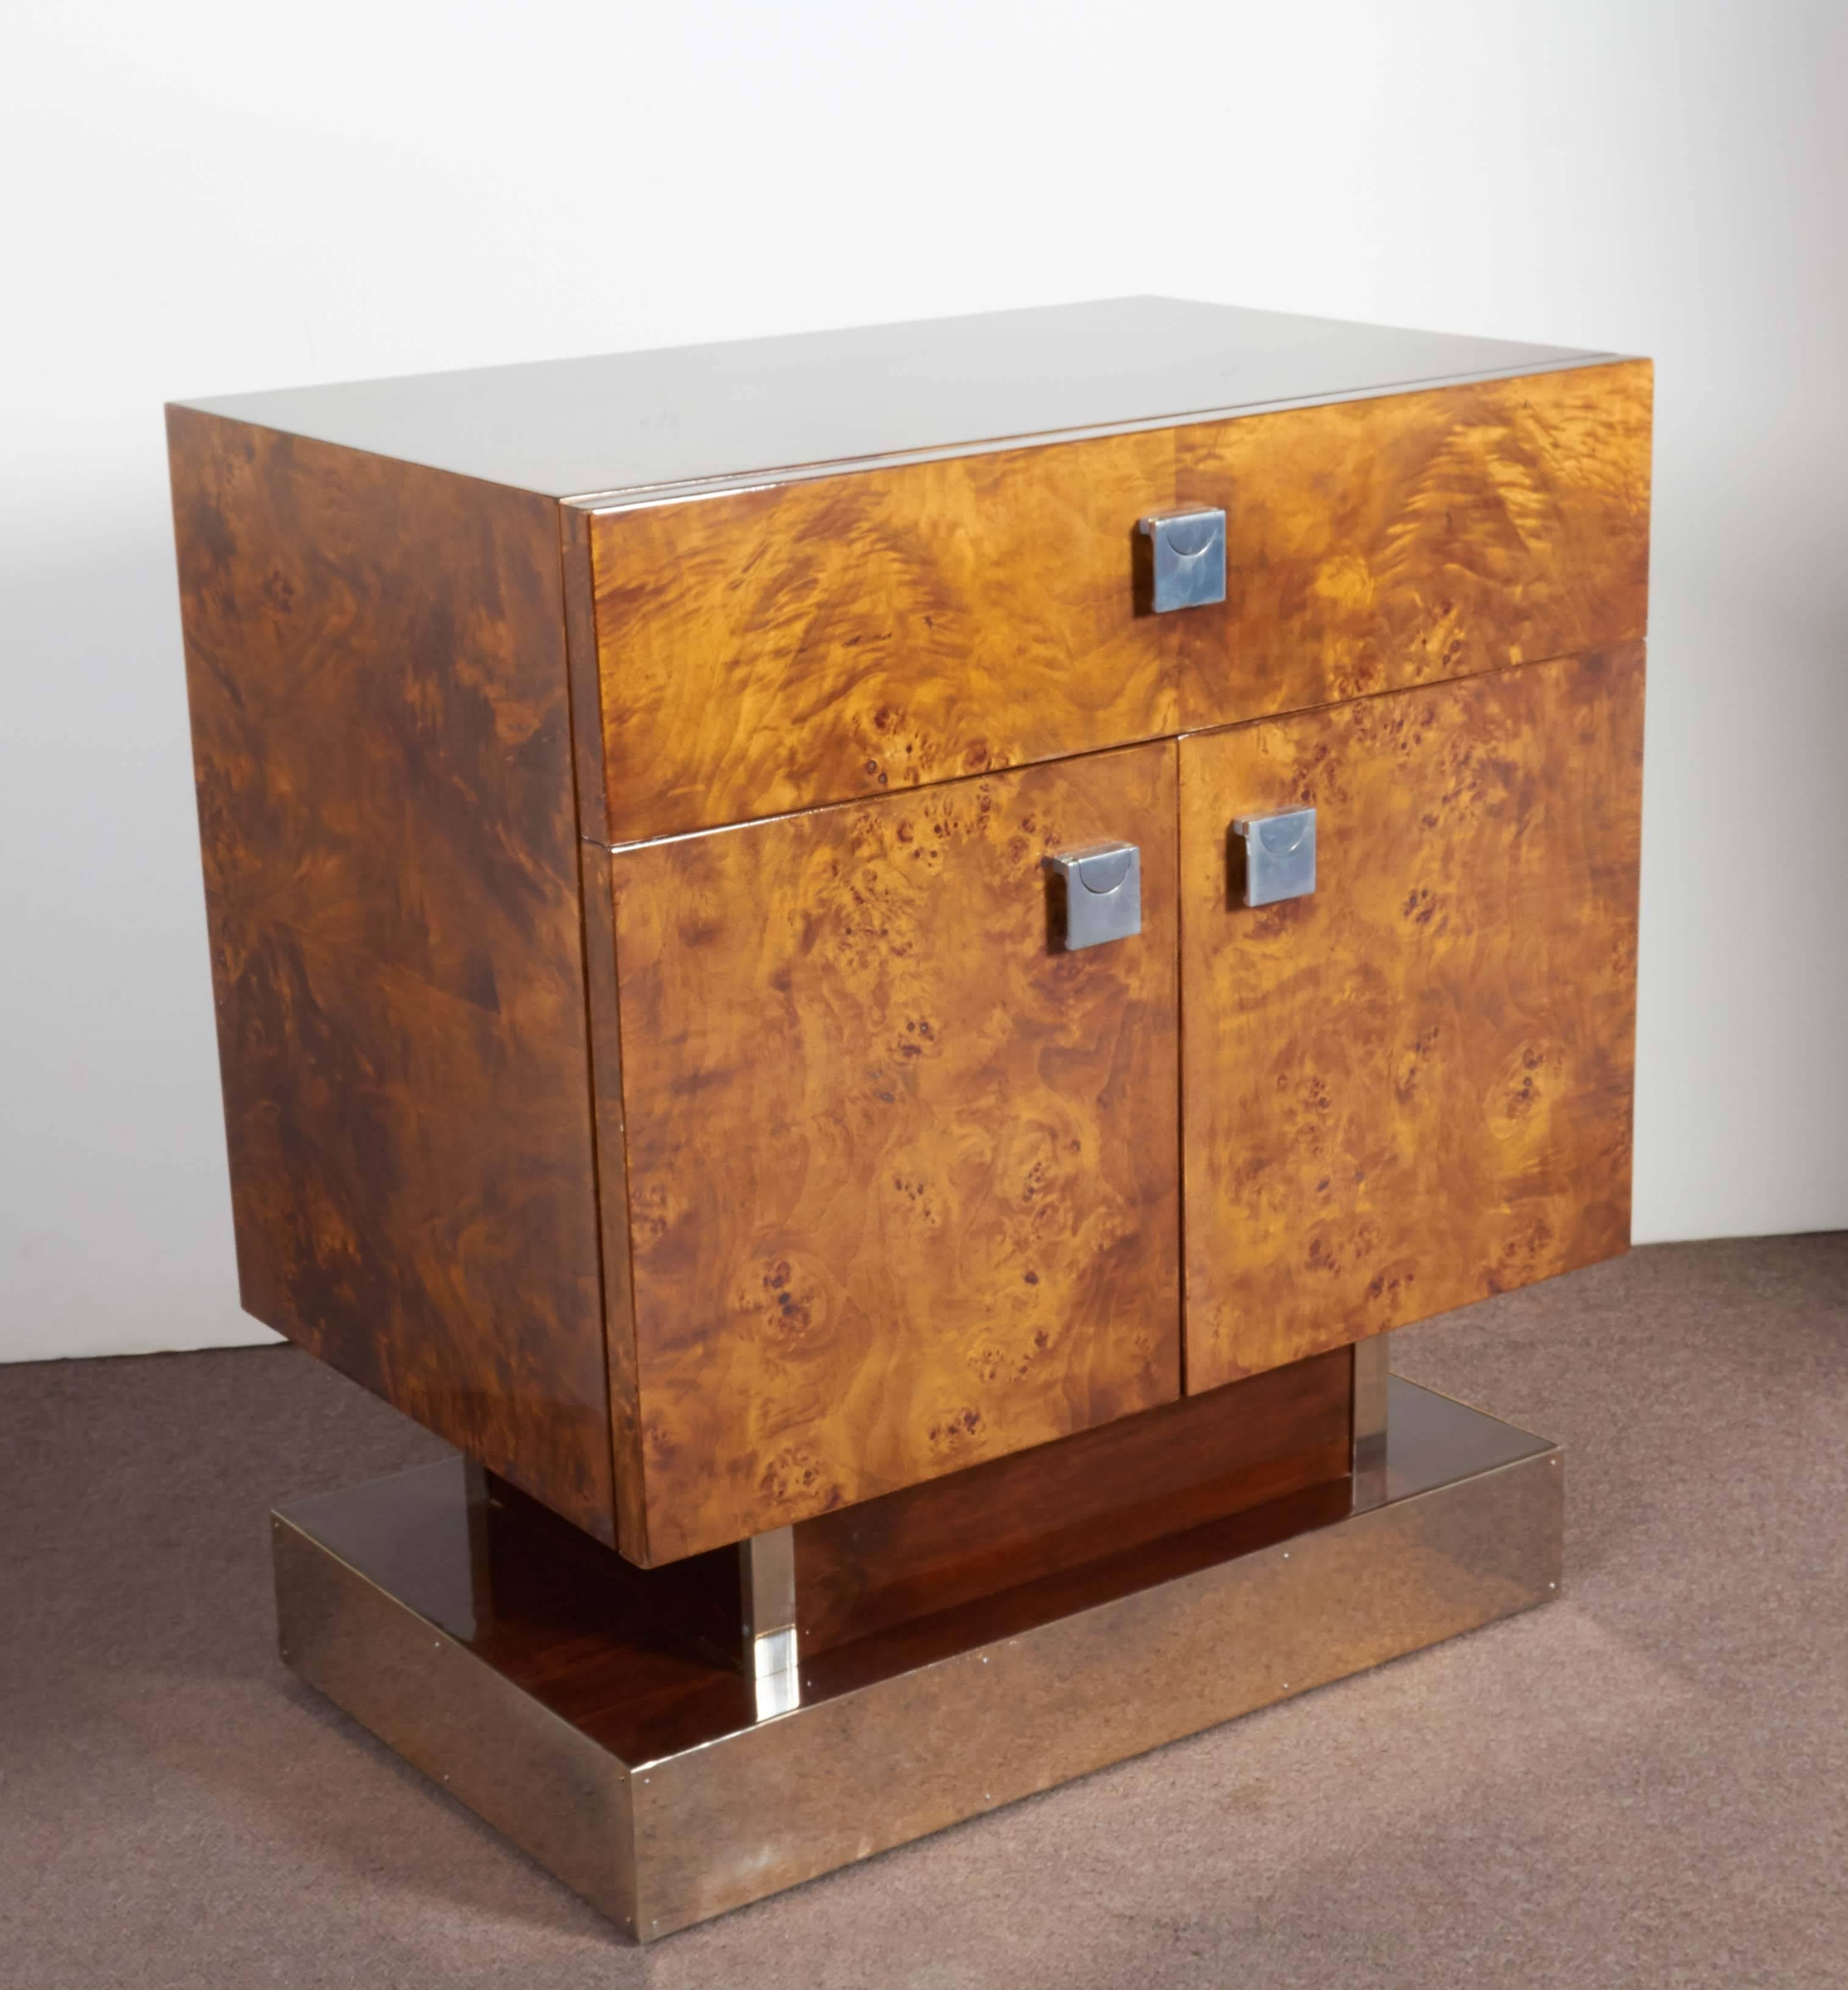 Pair of Art Deco style cubist nightstands or side tables.
Exotic burlwood on top, front and sides with large single drawer above two doors bearing geometric design nickeled mounts. The whole set on a two step square pedestal base with nickeled